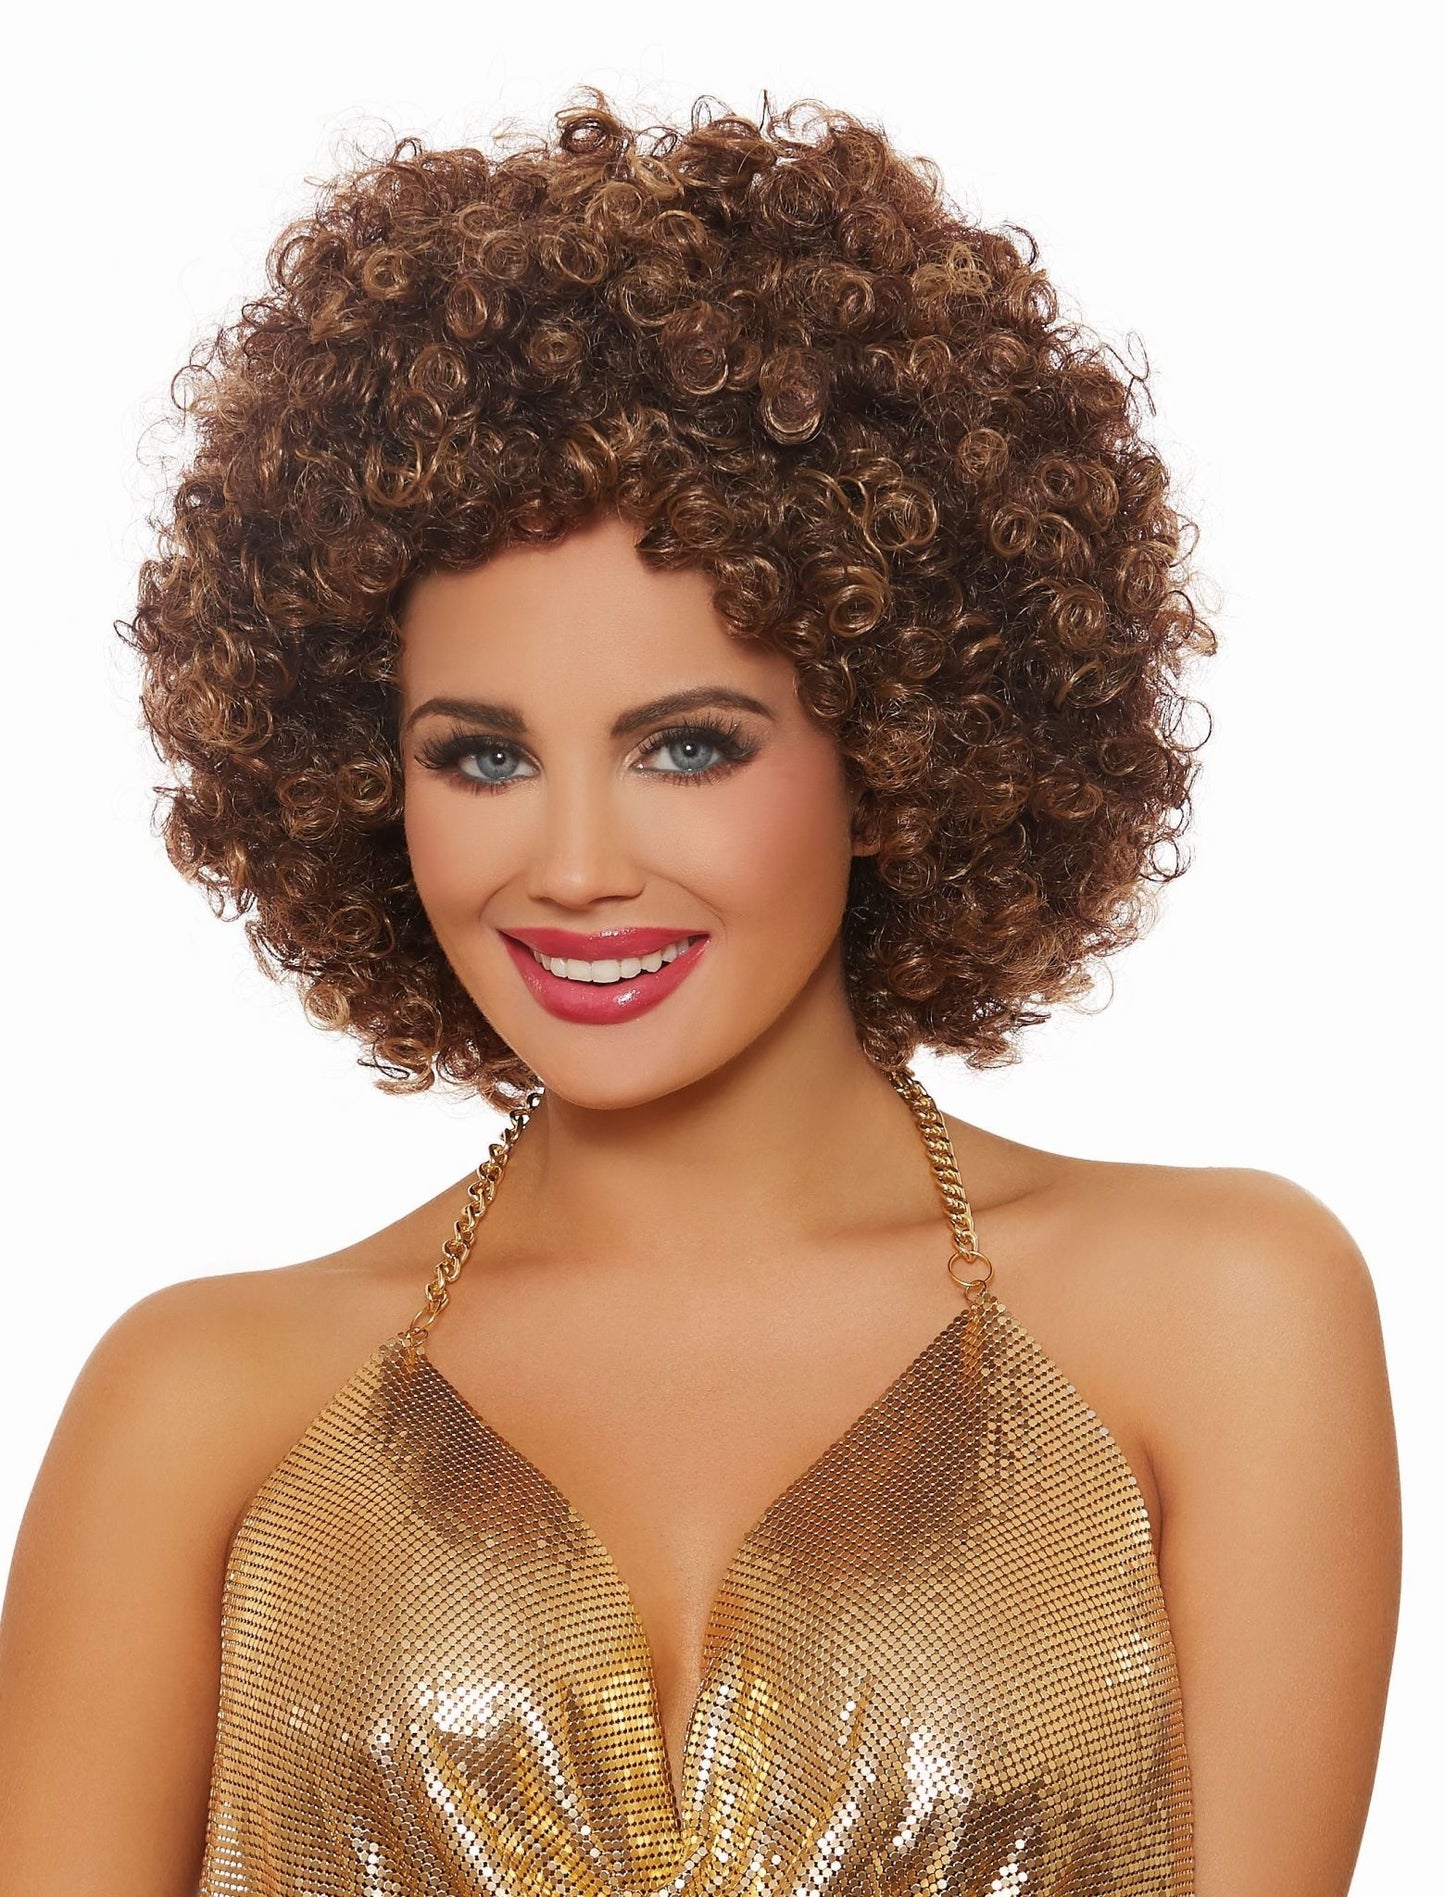 Unisex Afro Wig - Brown